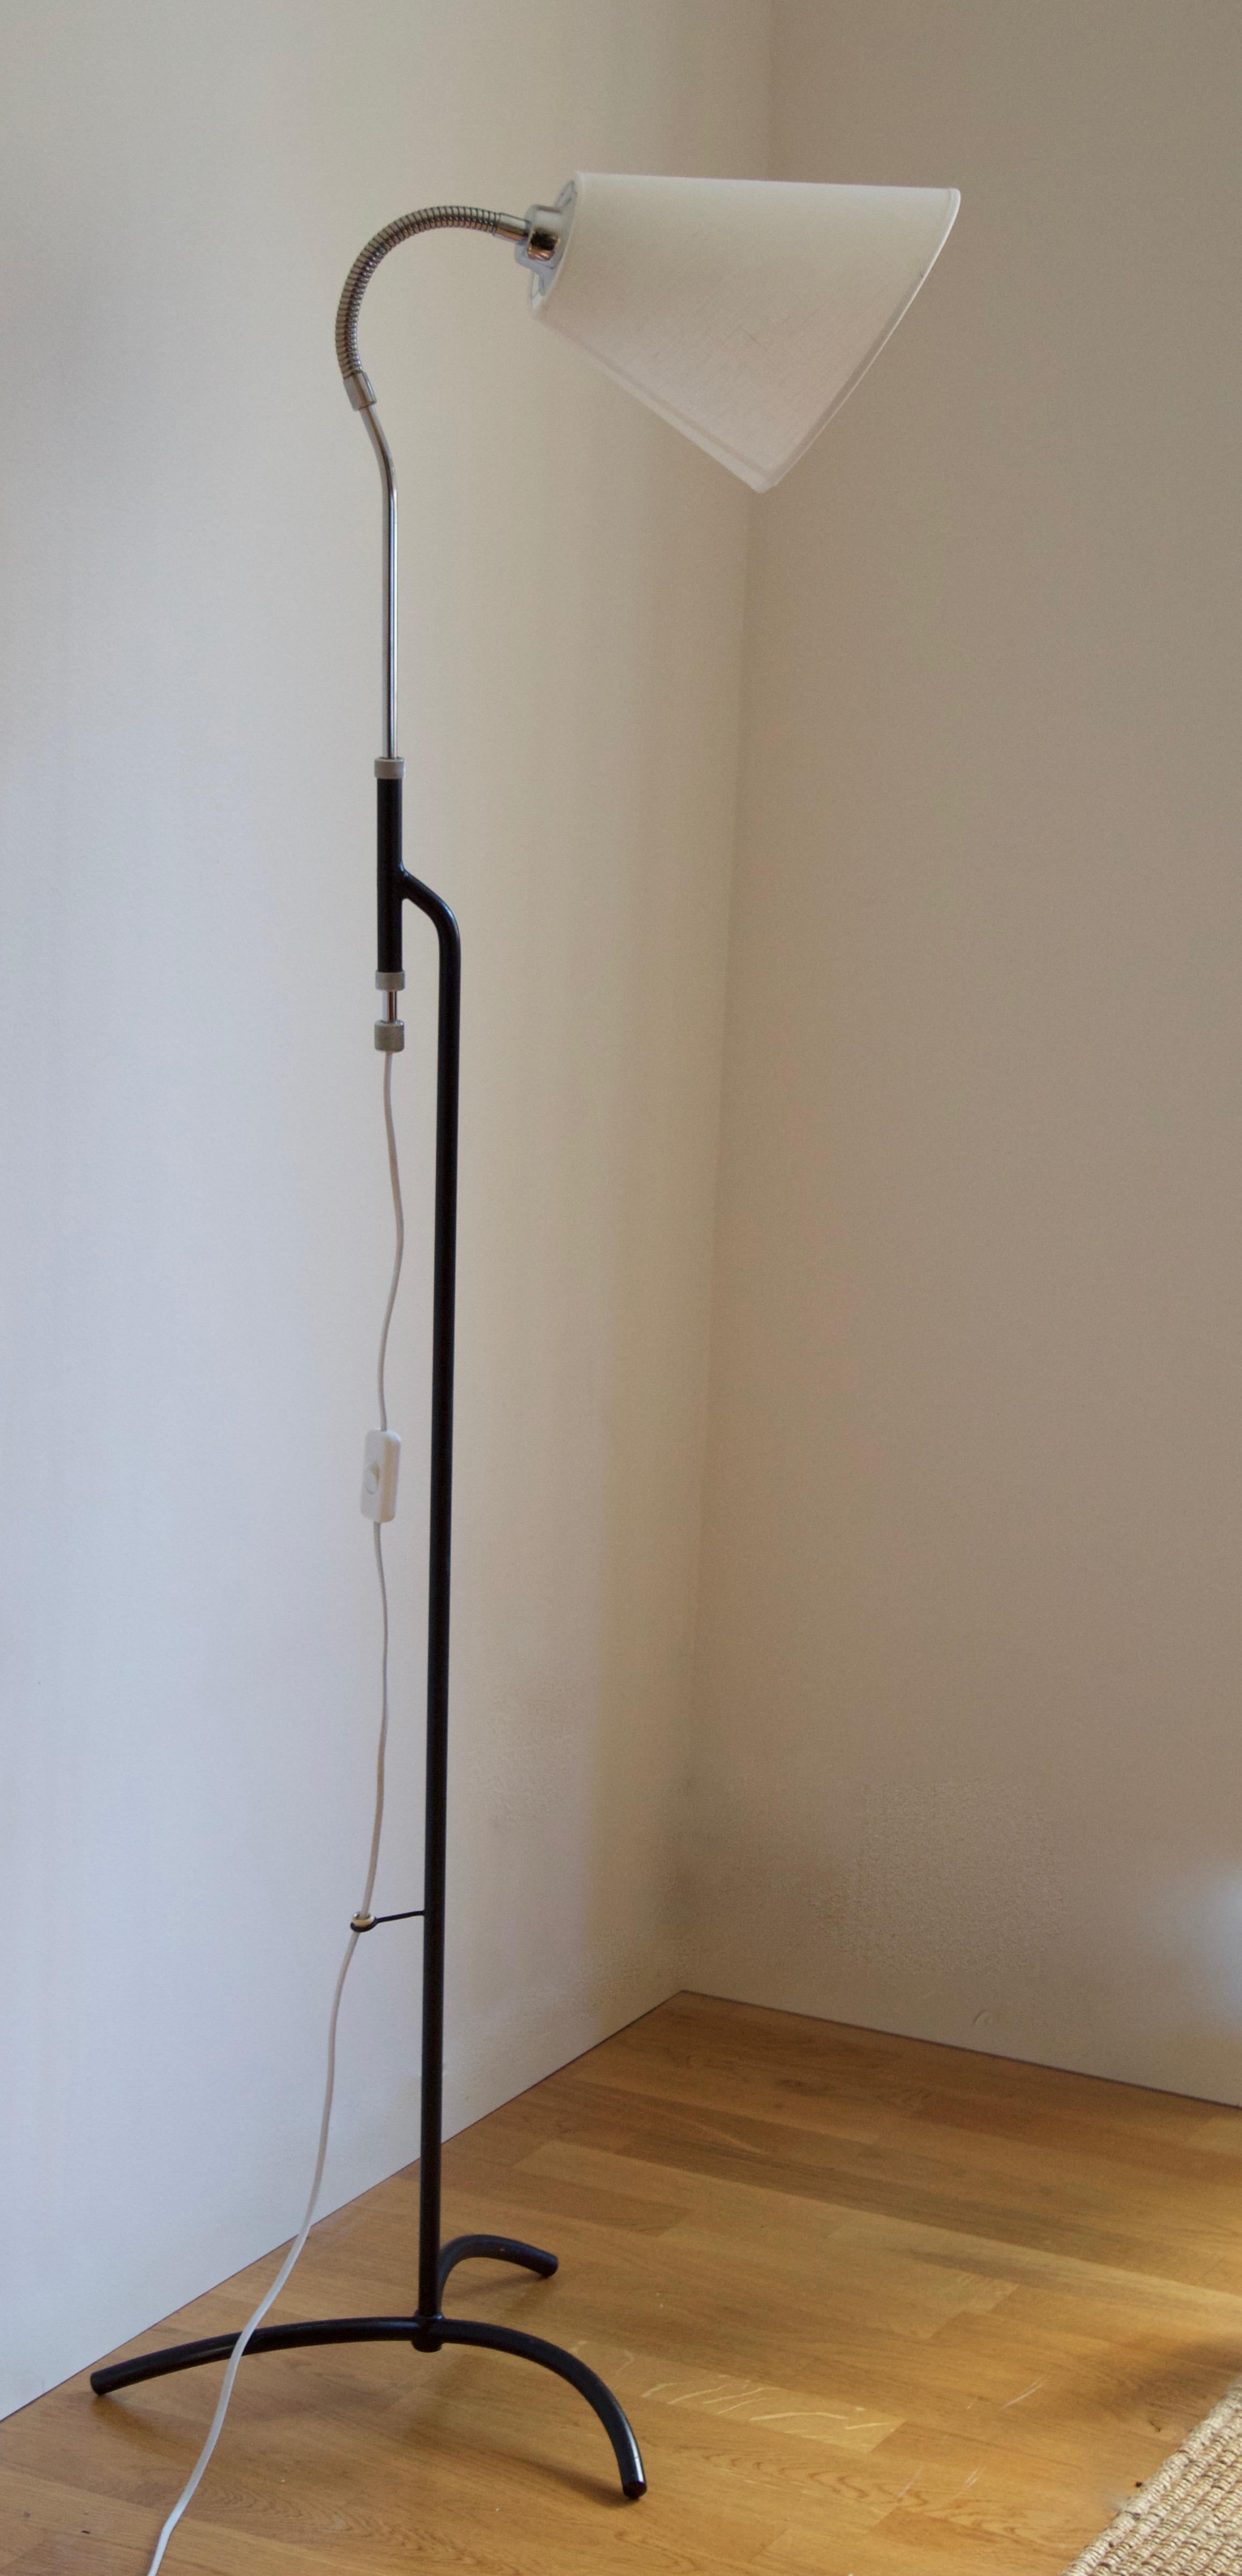 An adjustable functionalist floor lamp. Designed and produced in Sweden, 1940s-1950s. In black-lacquered metal and chromed steel. Brand new linen lampshade.